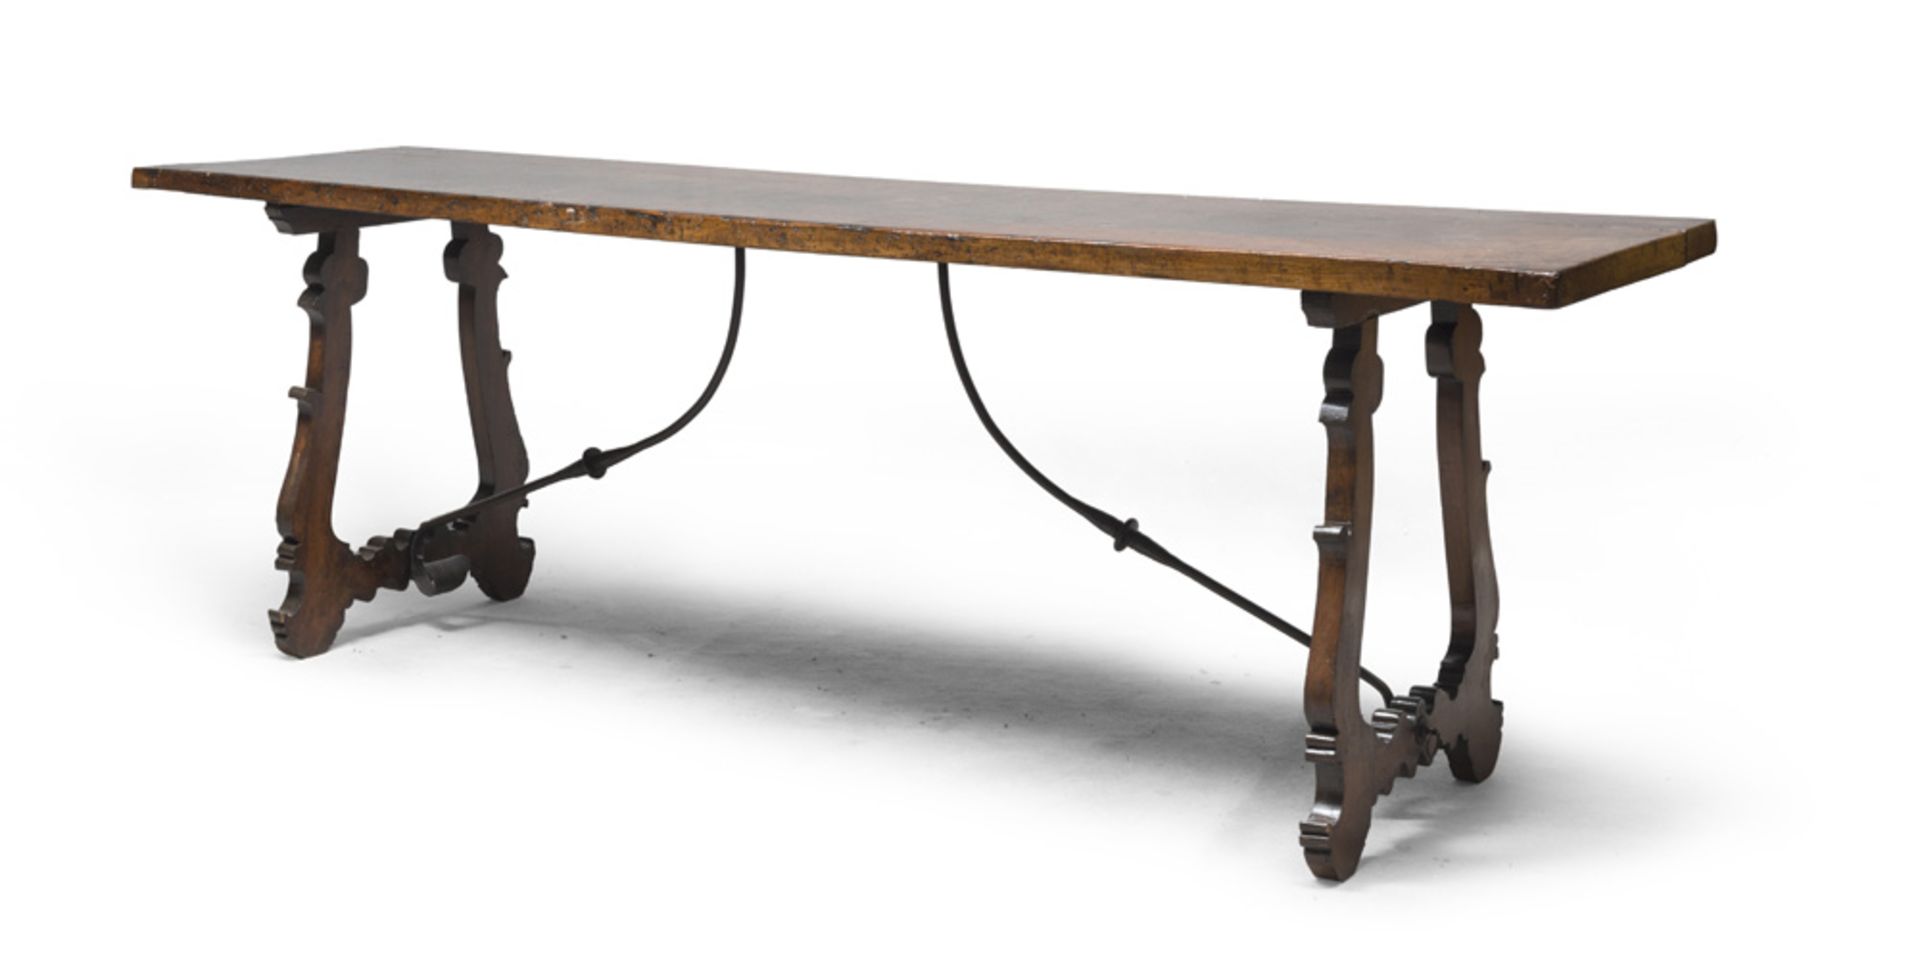 BEAUTIFUL REFECTORY TABLE IN WALNUT, ITALY CENTRAL 18TH CENTURY with rectangular tops and lyre legs,